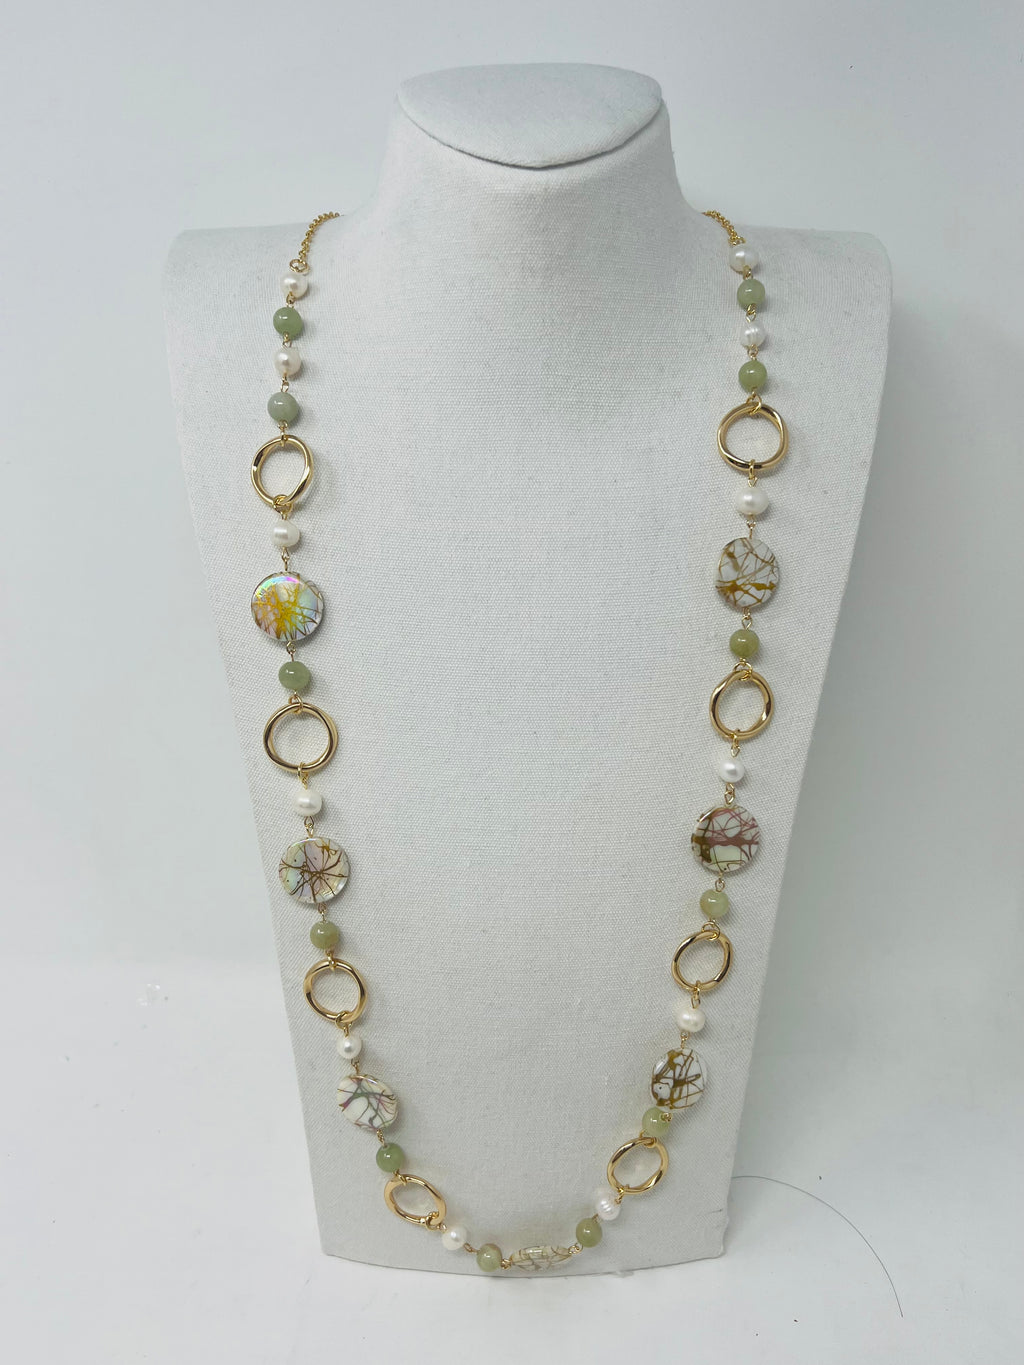 long chain necklace